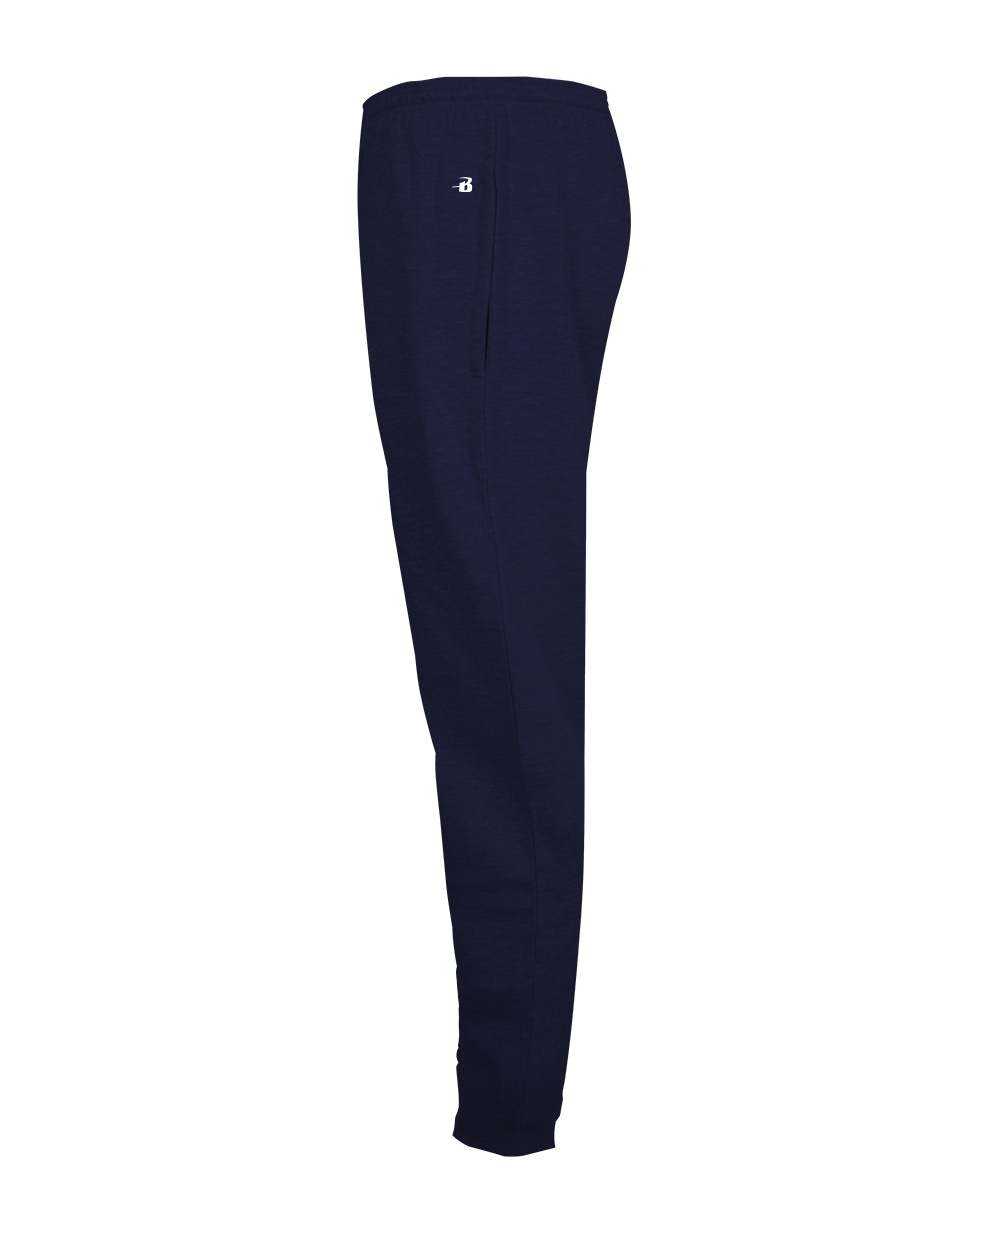 Badger Sport 2215 Athletic Fleece Youth Jogger Pant - Navy - HIT a Double - 1